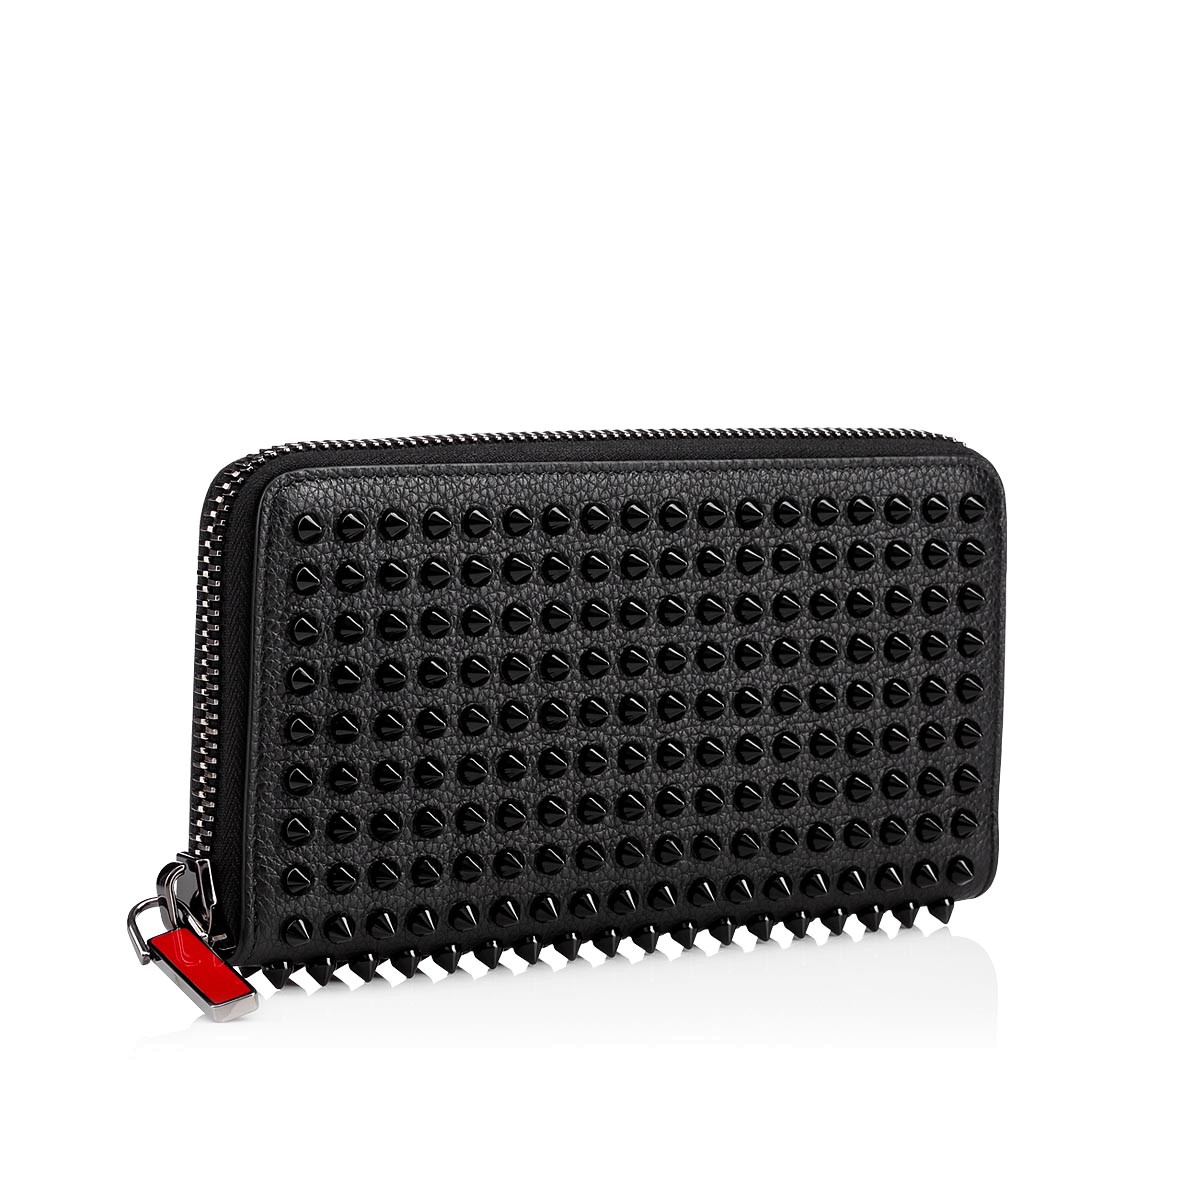 Mens Wallets and cardholders Christian Louboutin Wallets and cardholders Christian Louboutin Panettone Medium Leather Wallet in Black for Men 